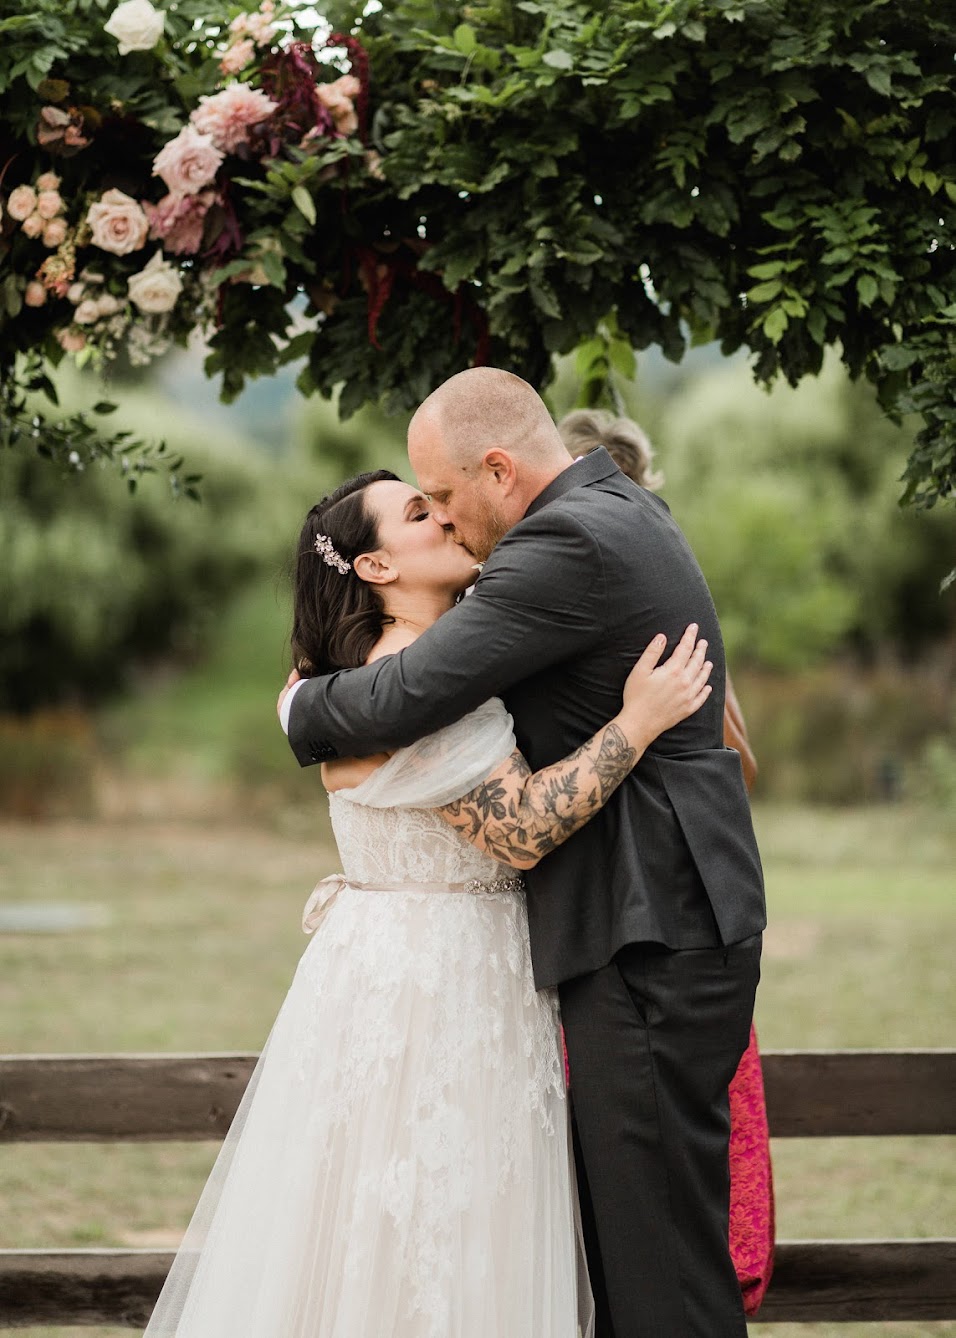 The bride and groom hugging and kissing each other under their floral arbor. 